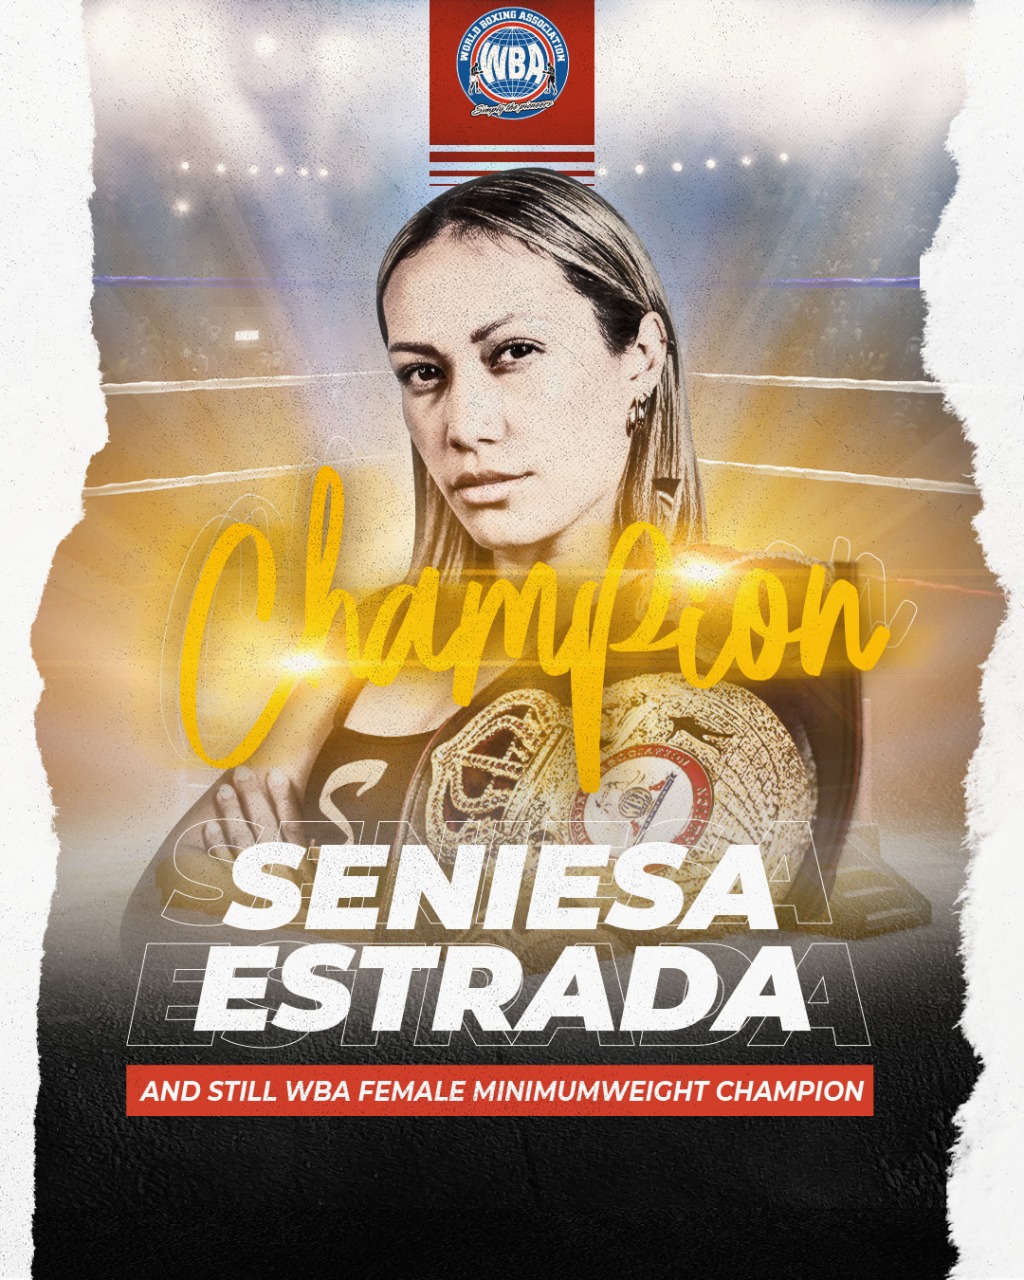 Seniesa defended her WBA titled with a spectacular knockout